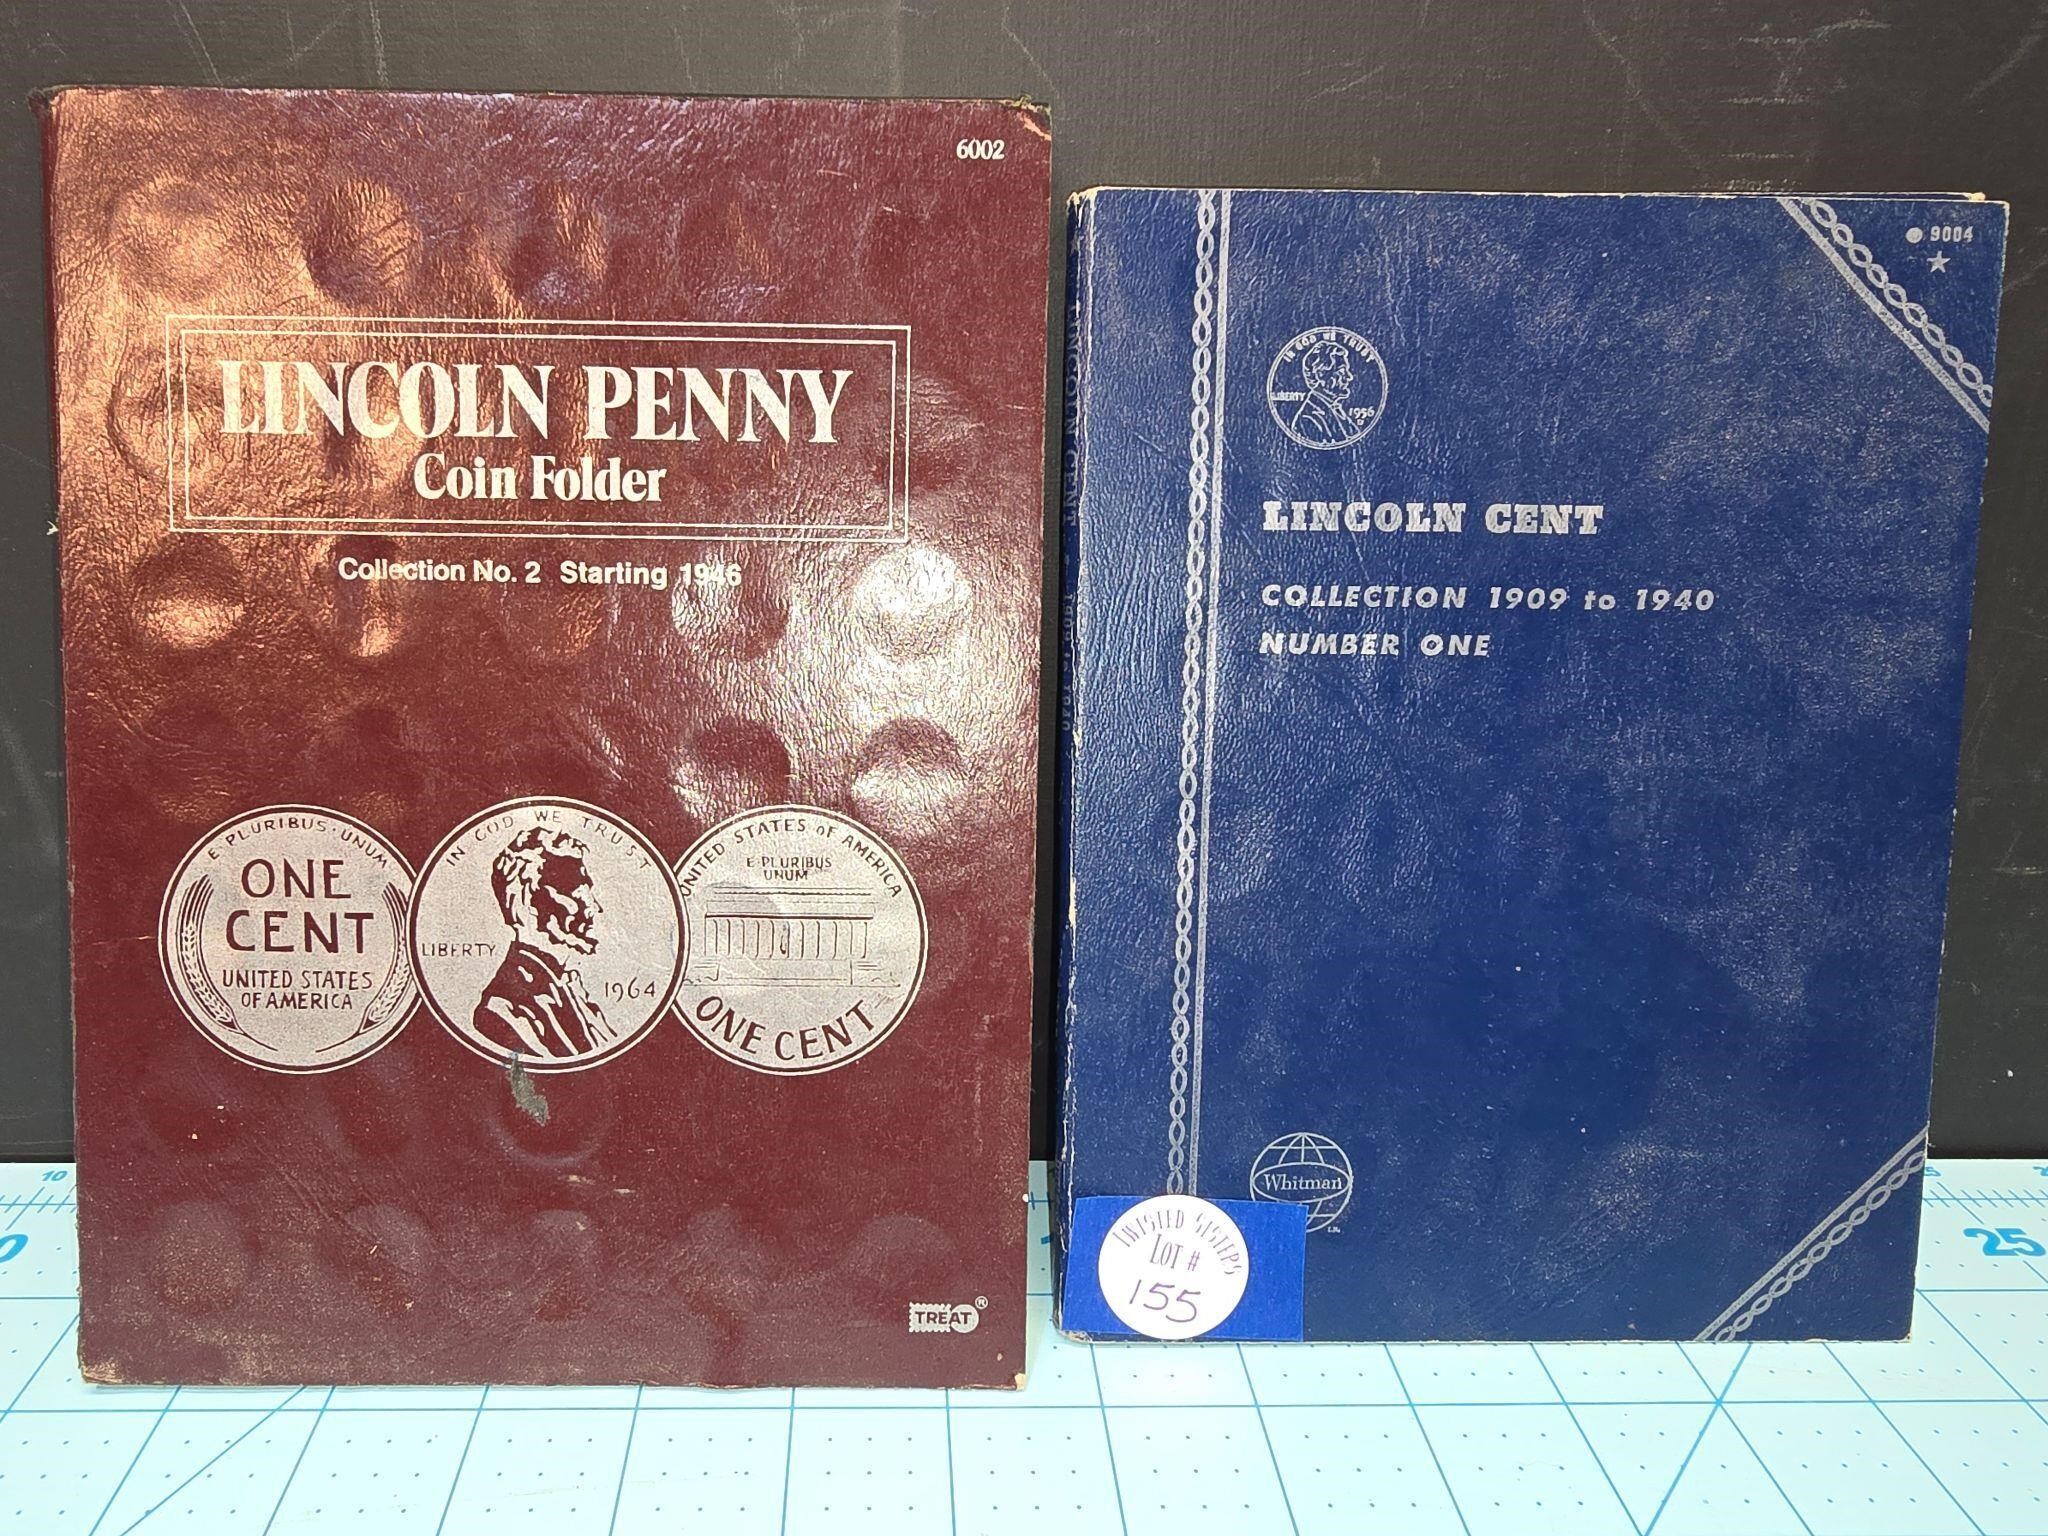 Lincoln cent collection books with some pennies